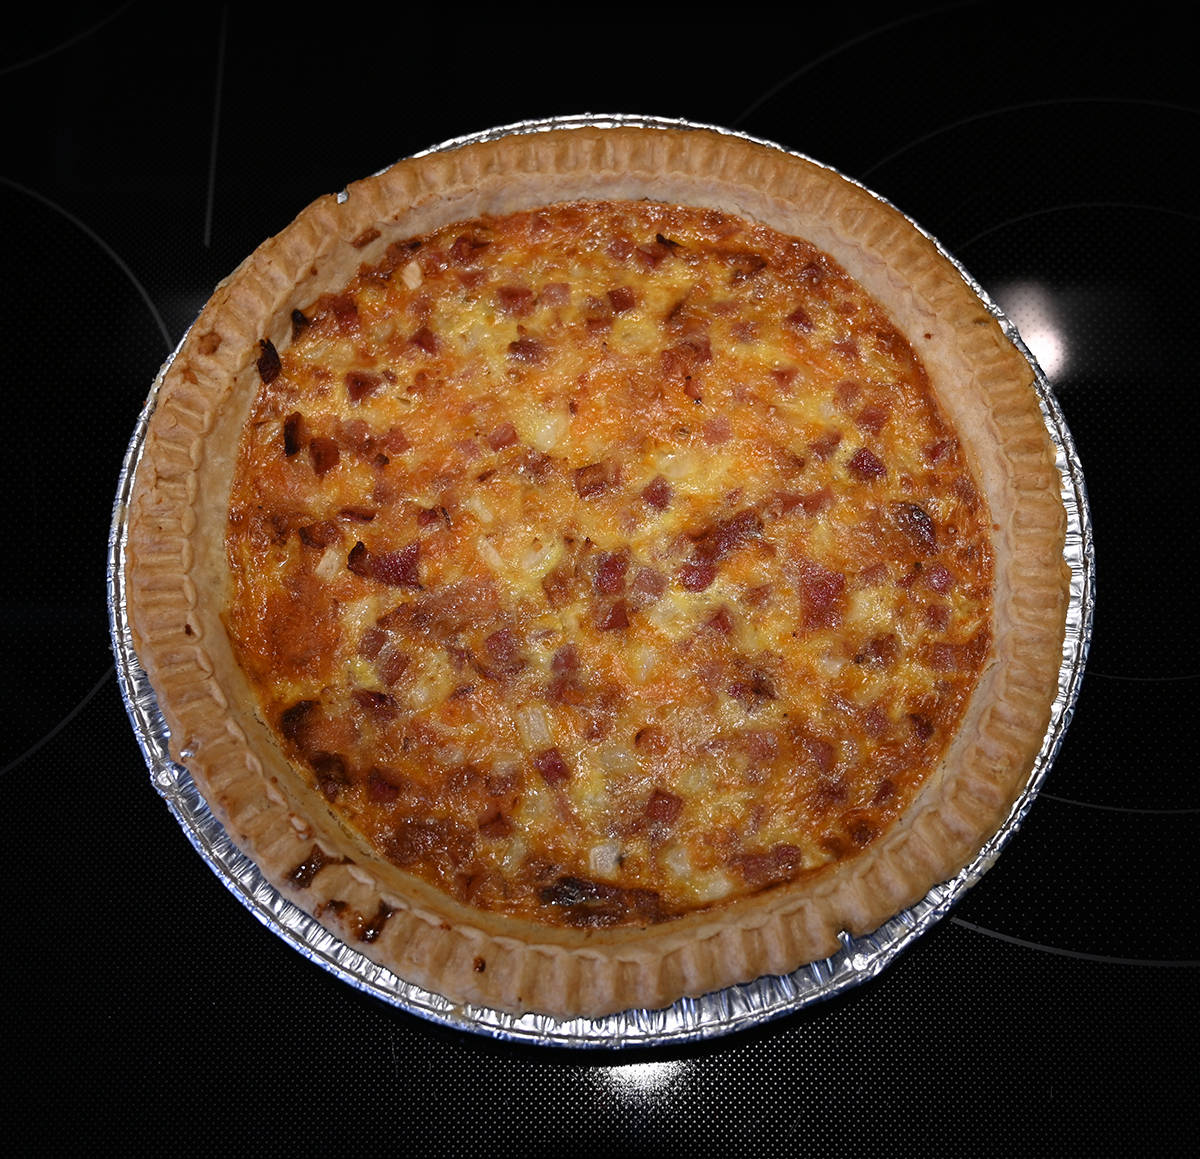 Top down image of the whole quiche out of the packaging sitting on a table after being baked.